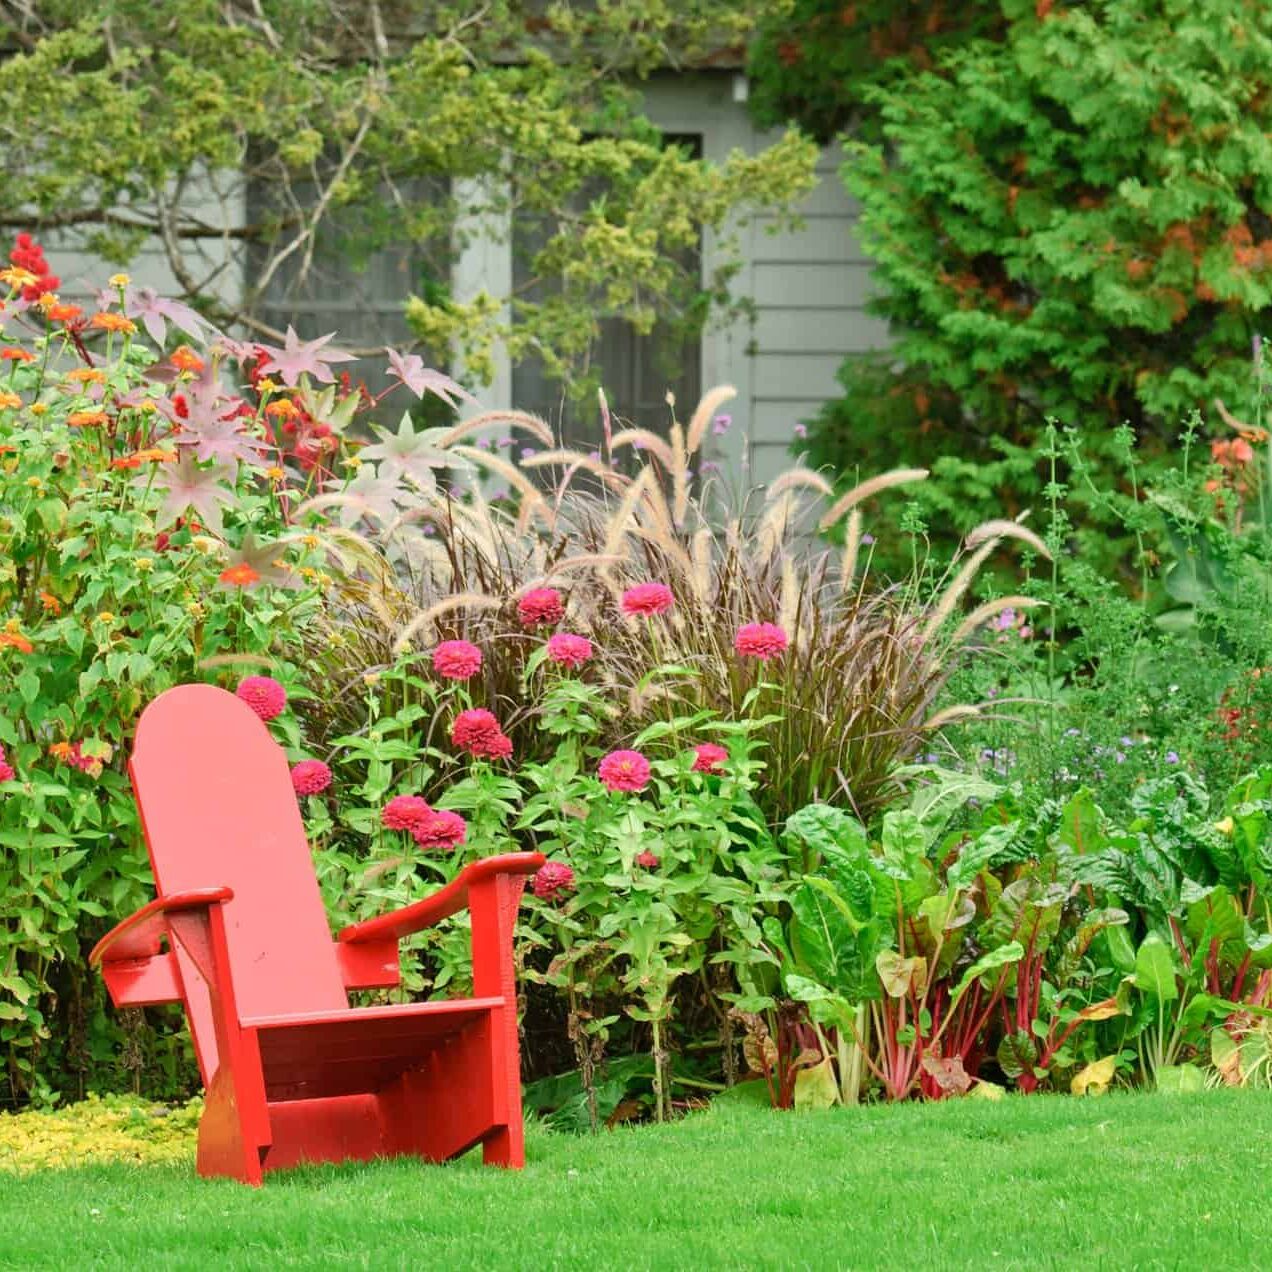 Garden with red chair